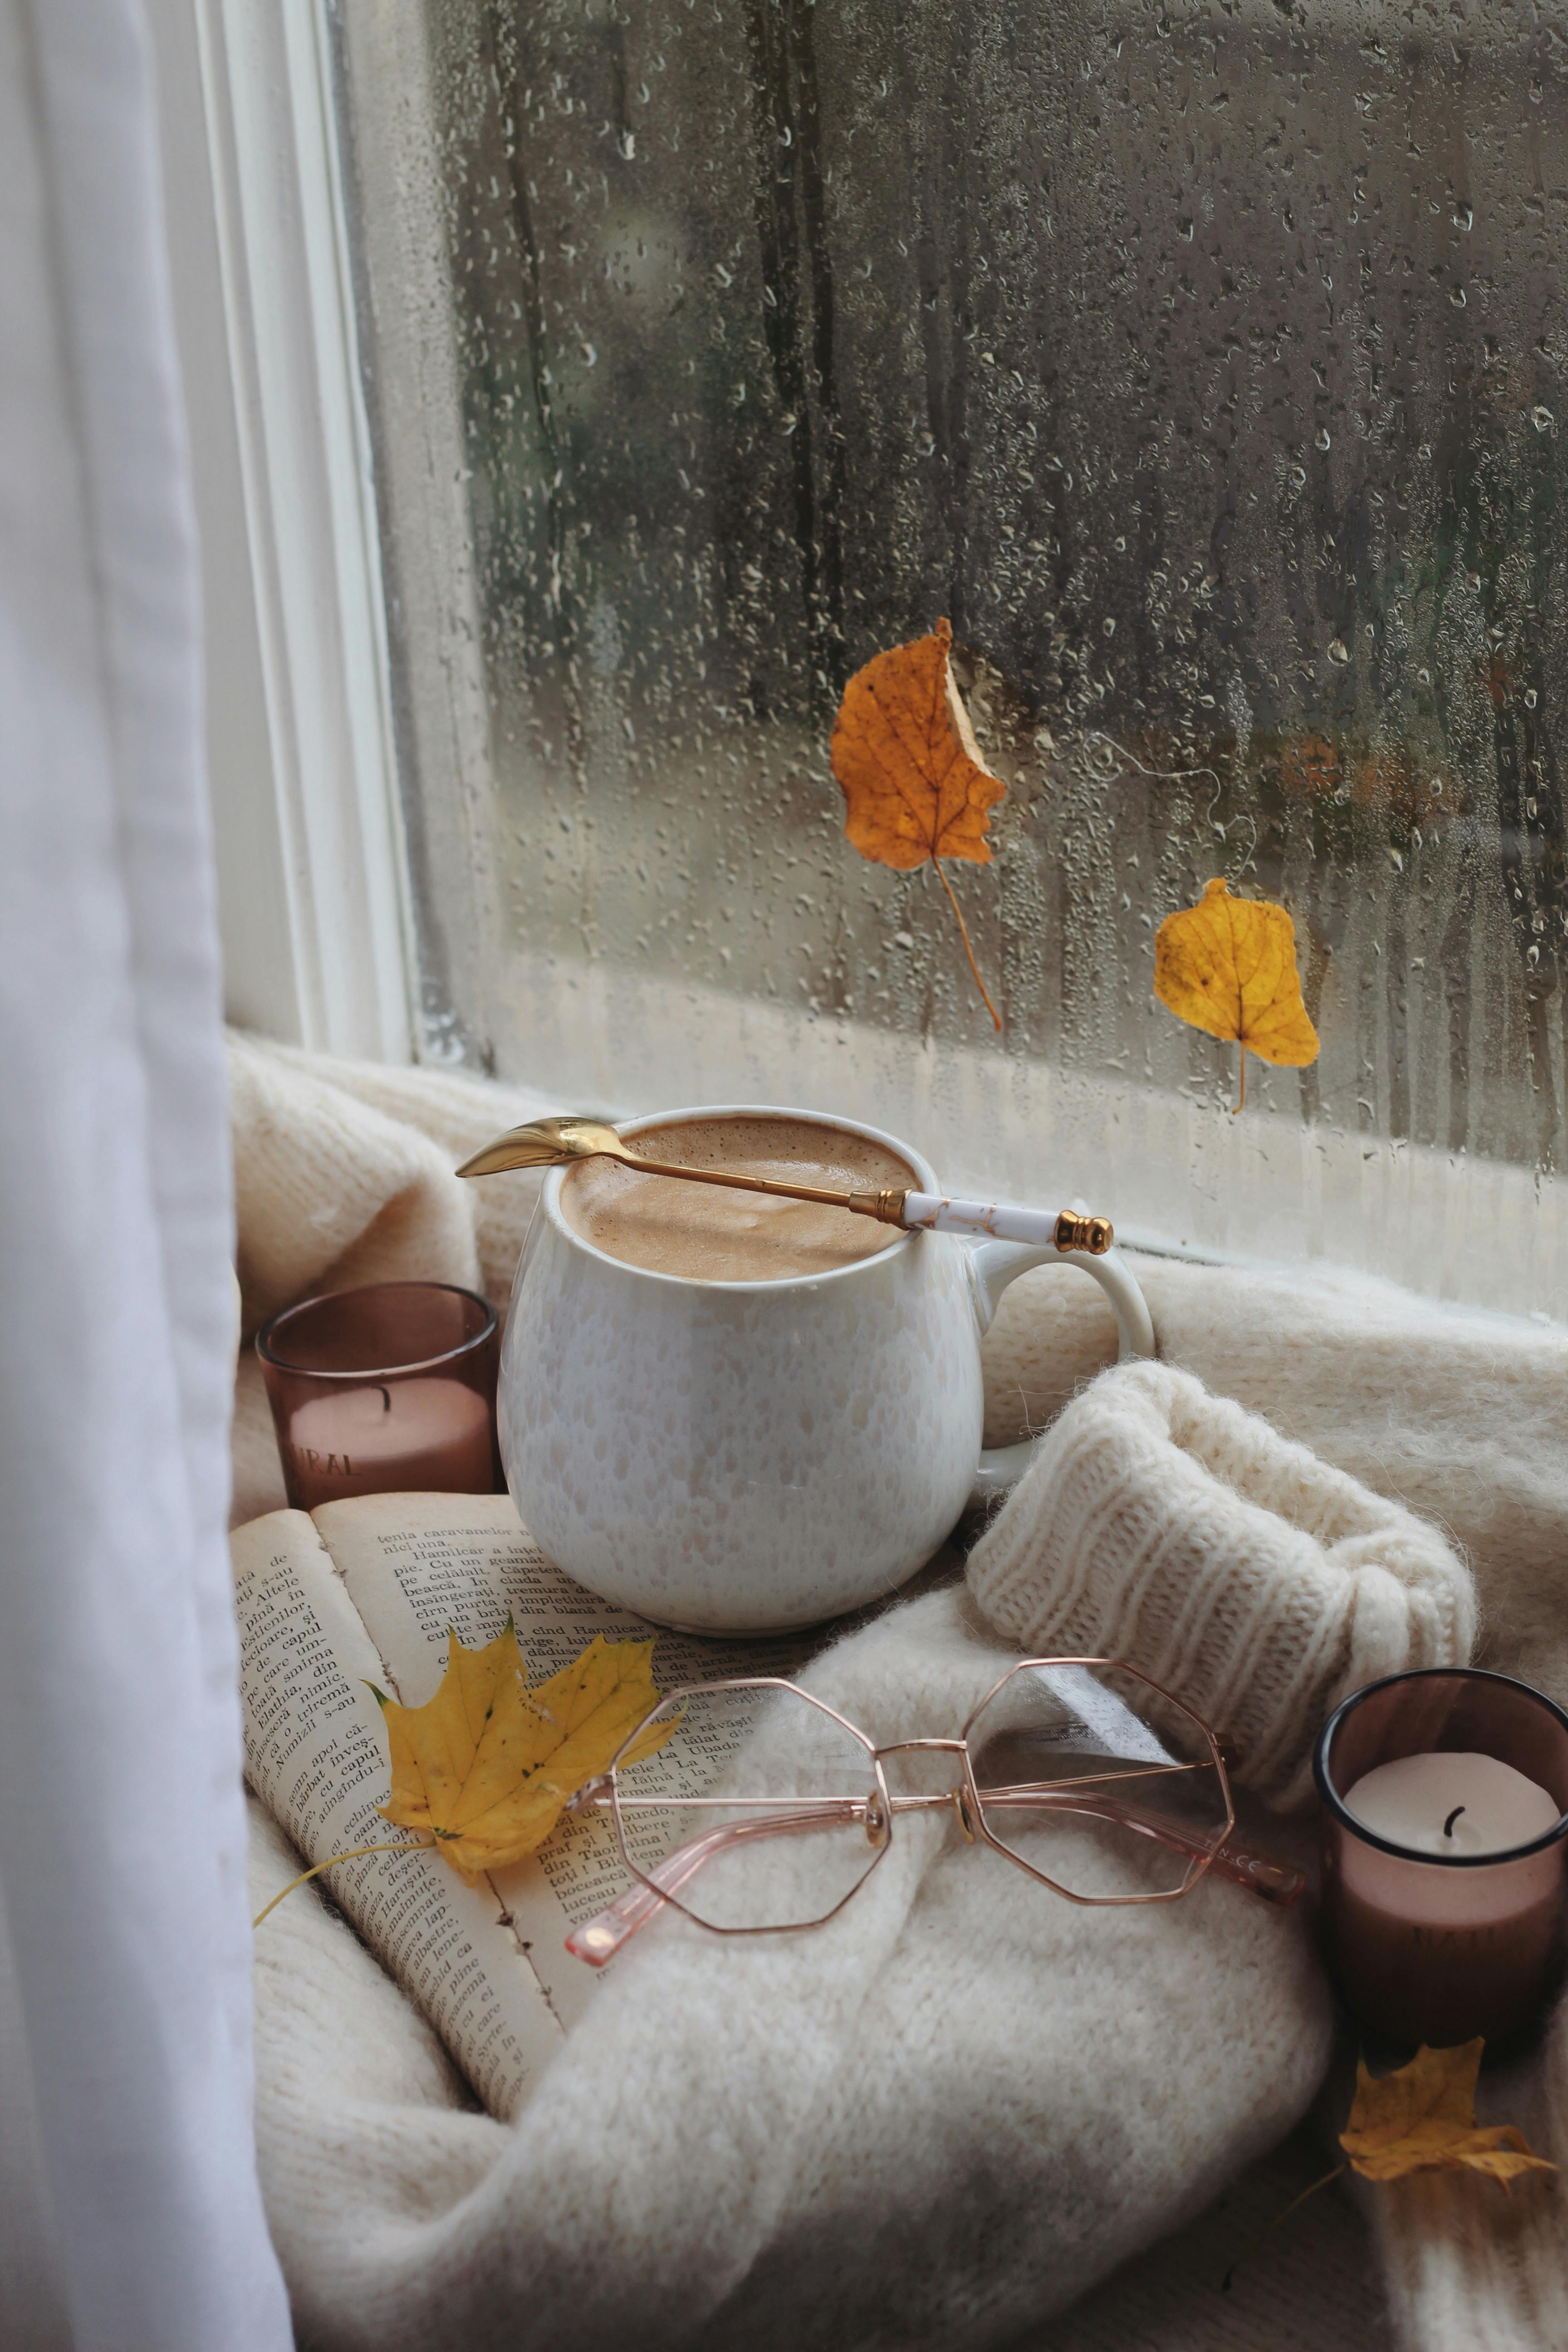 Coffee, glasses and sweater on book in autumn scene · Free Stock Photo